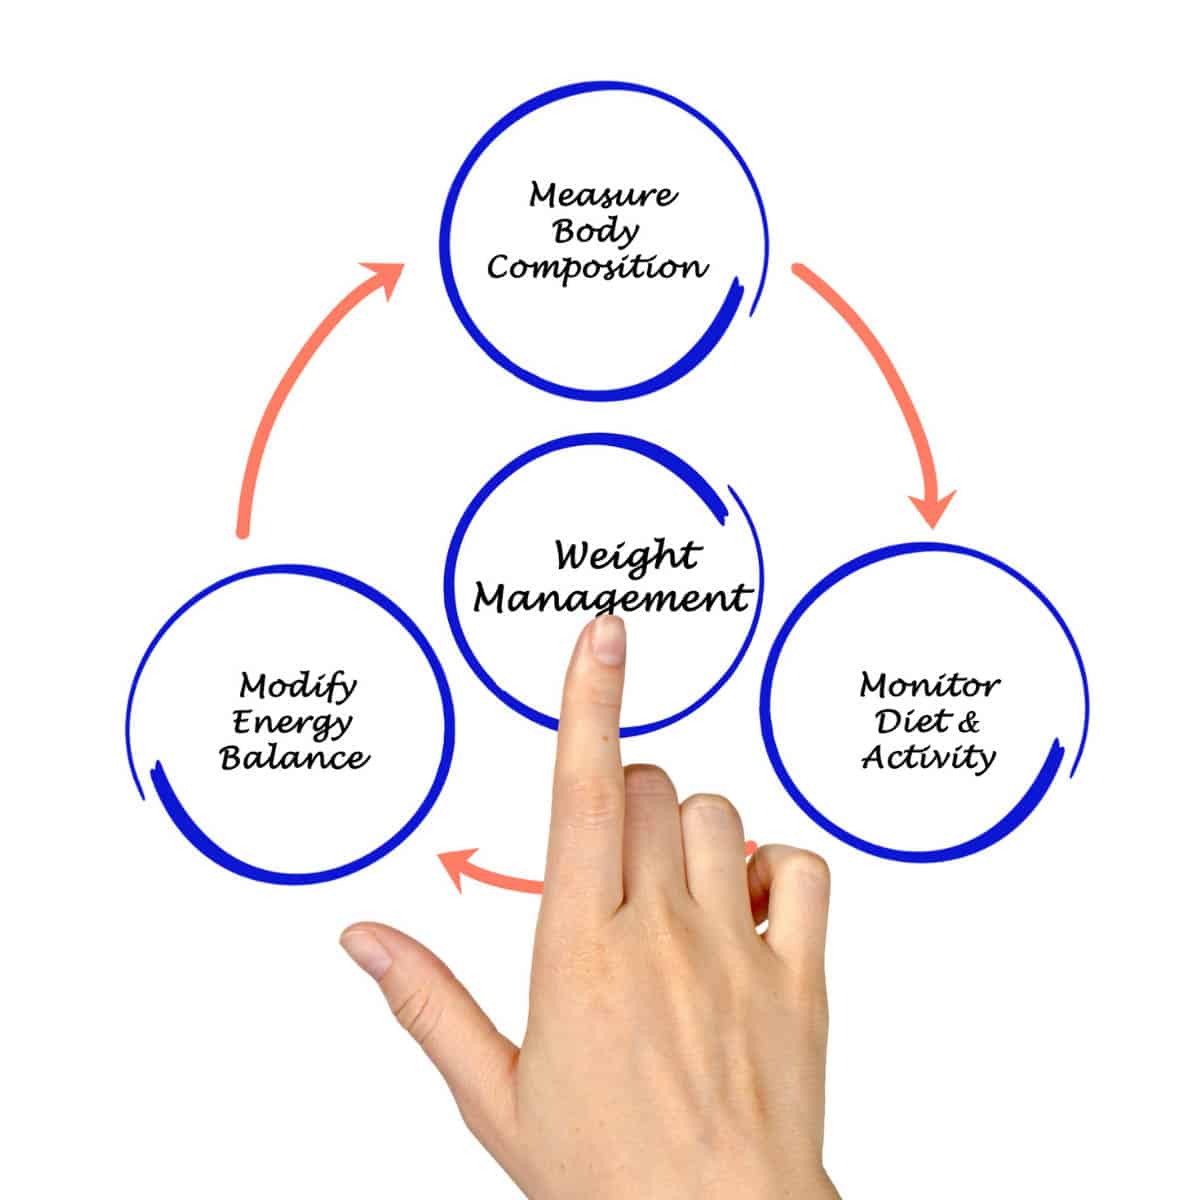 Weight Management diagram on a whiteboard